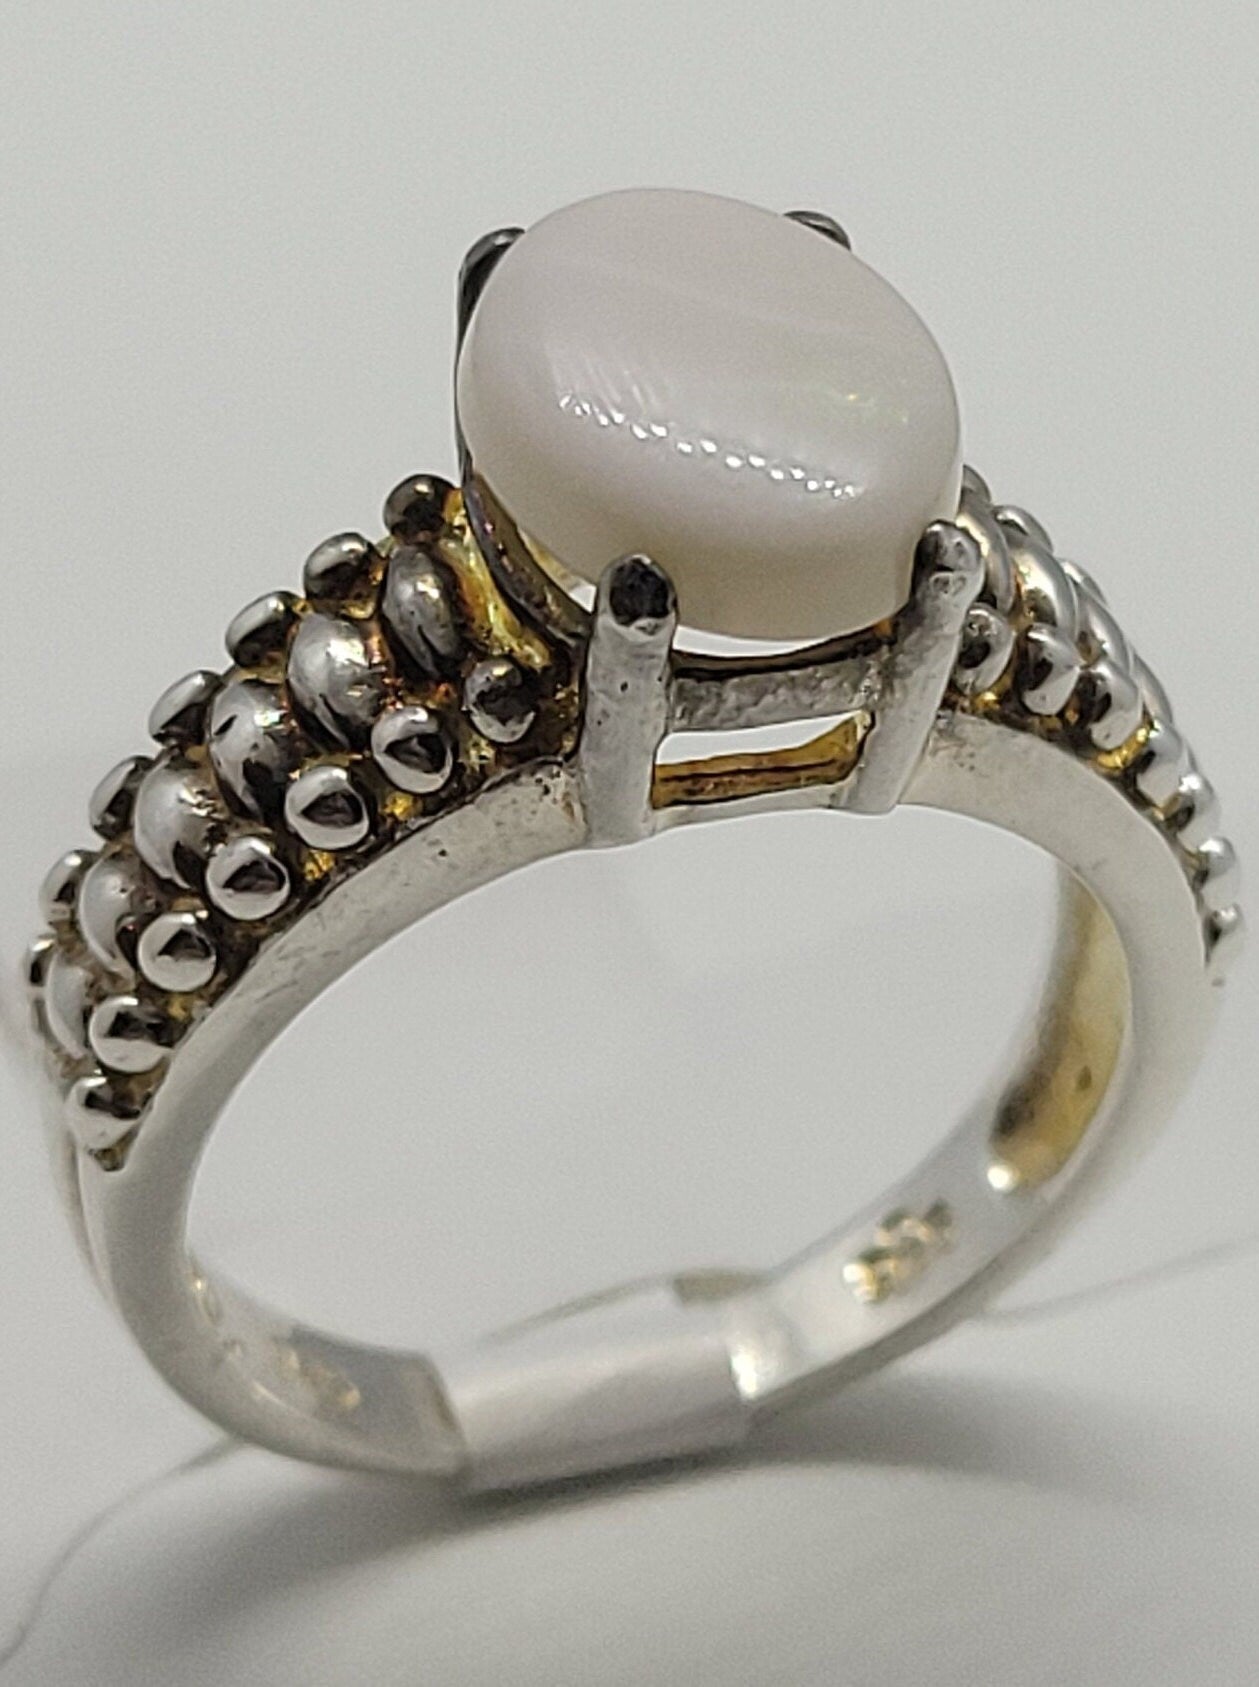 White Fire Opal Ring in 925 Sterling Silver on white